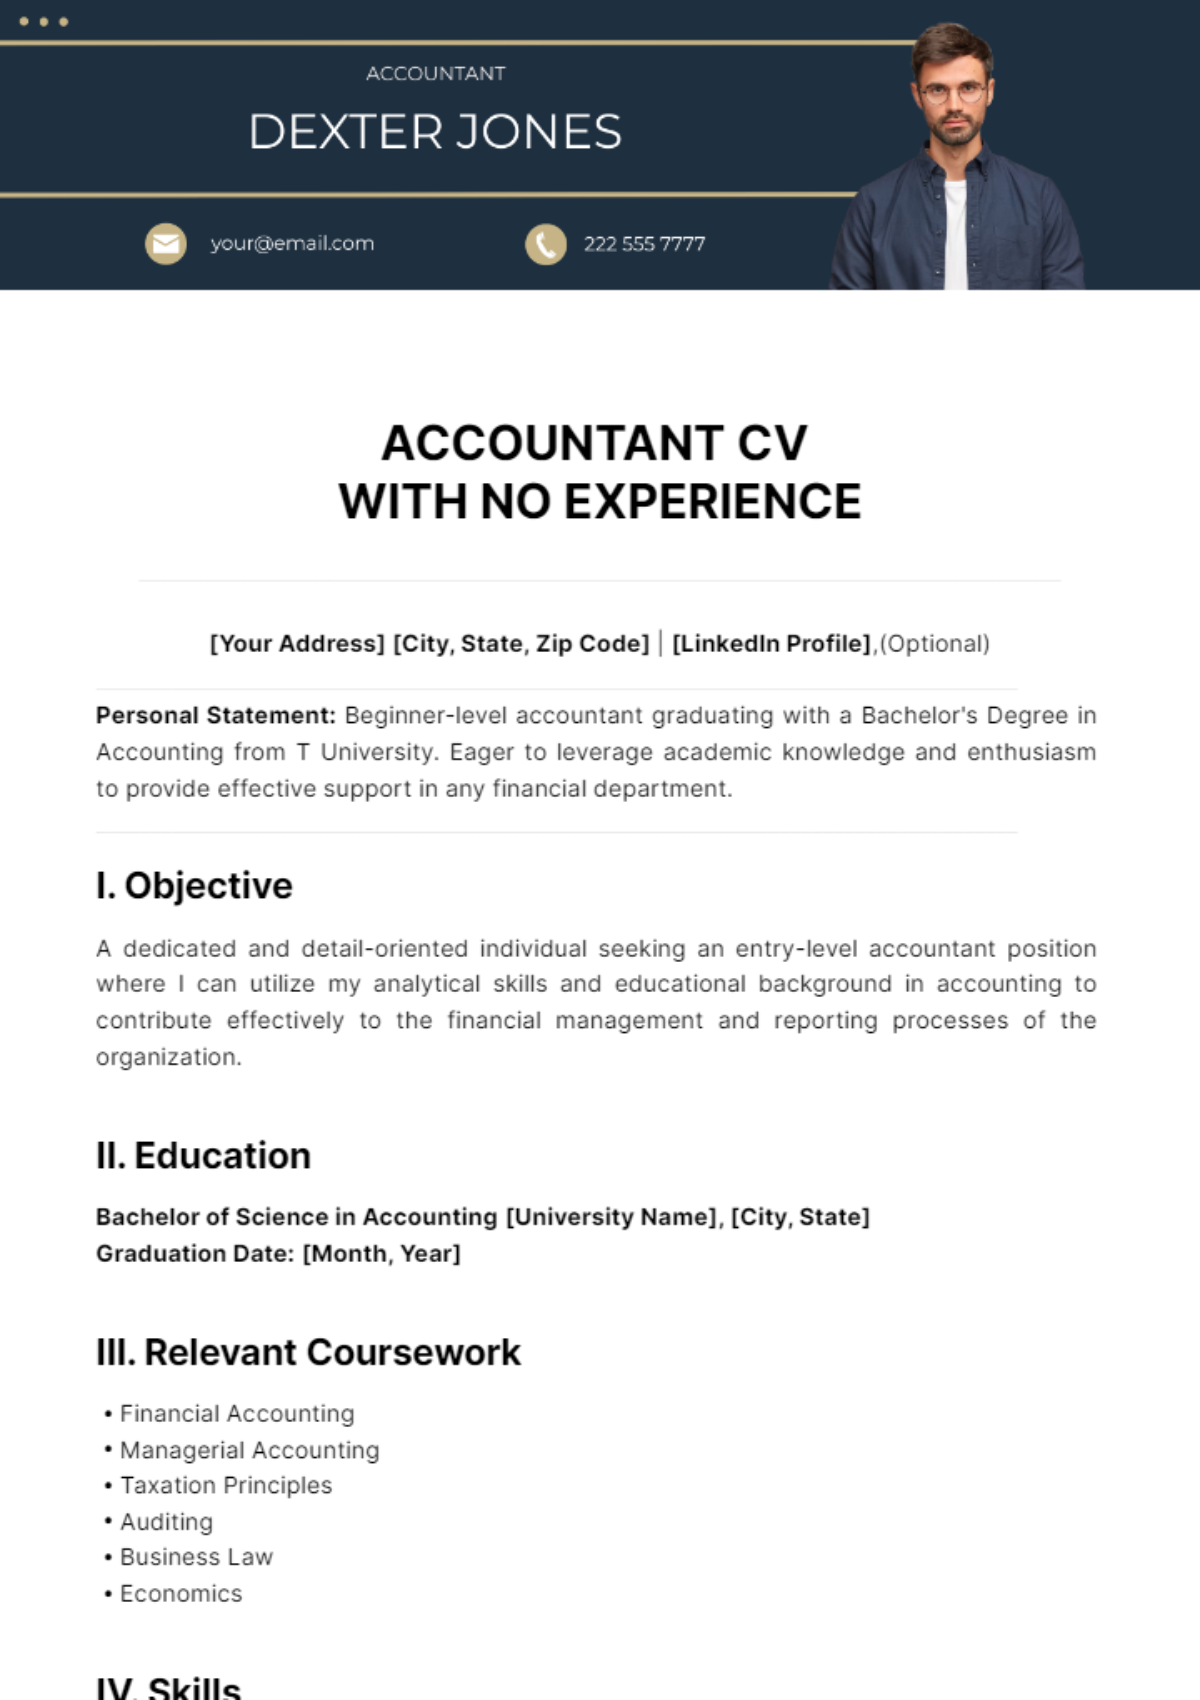 Accountant CV with No Experience Template